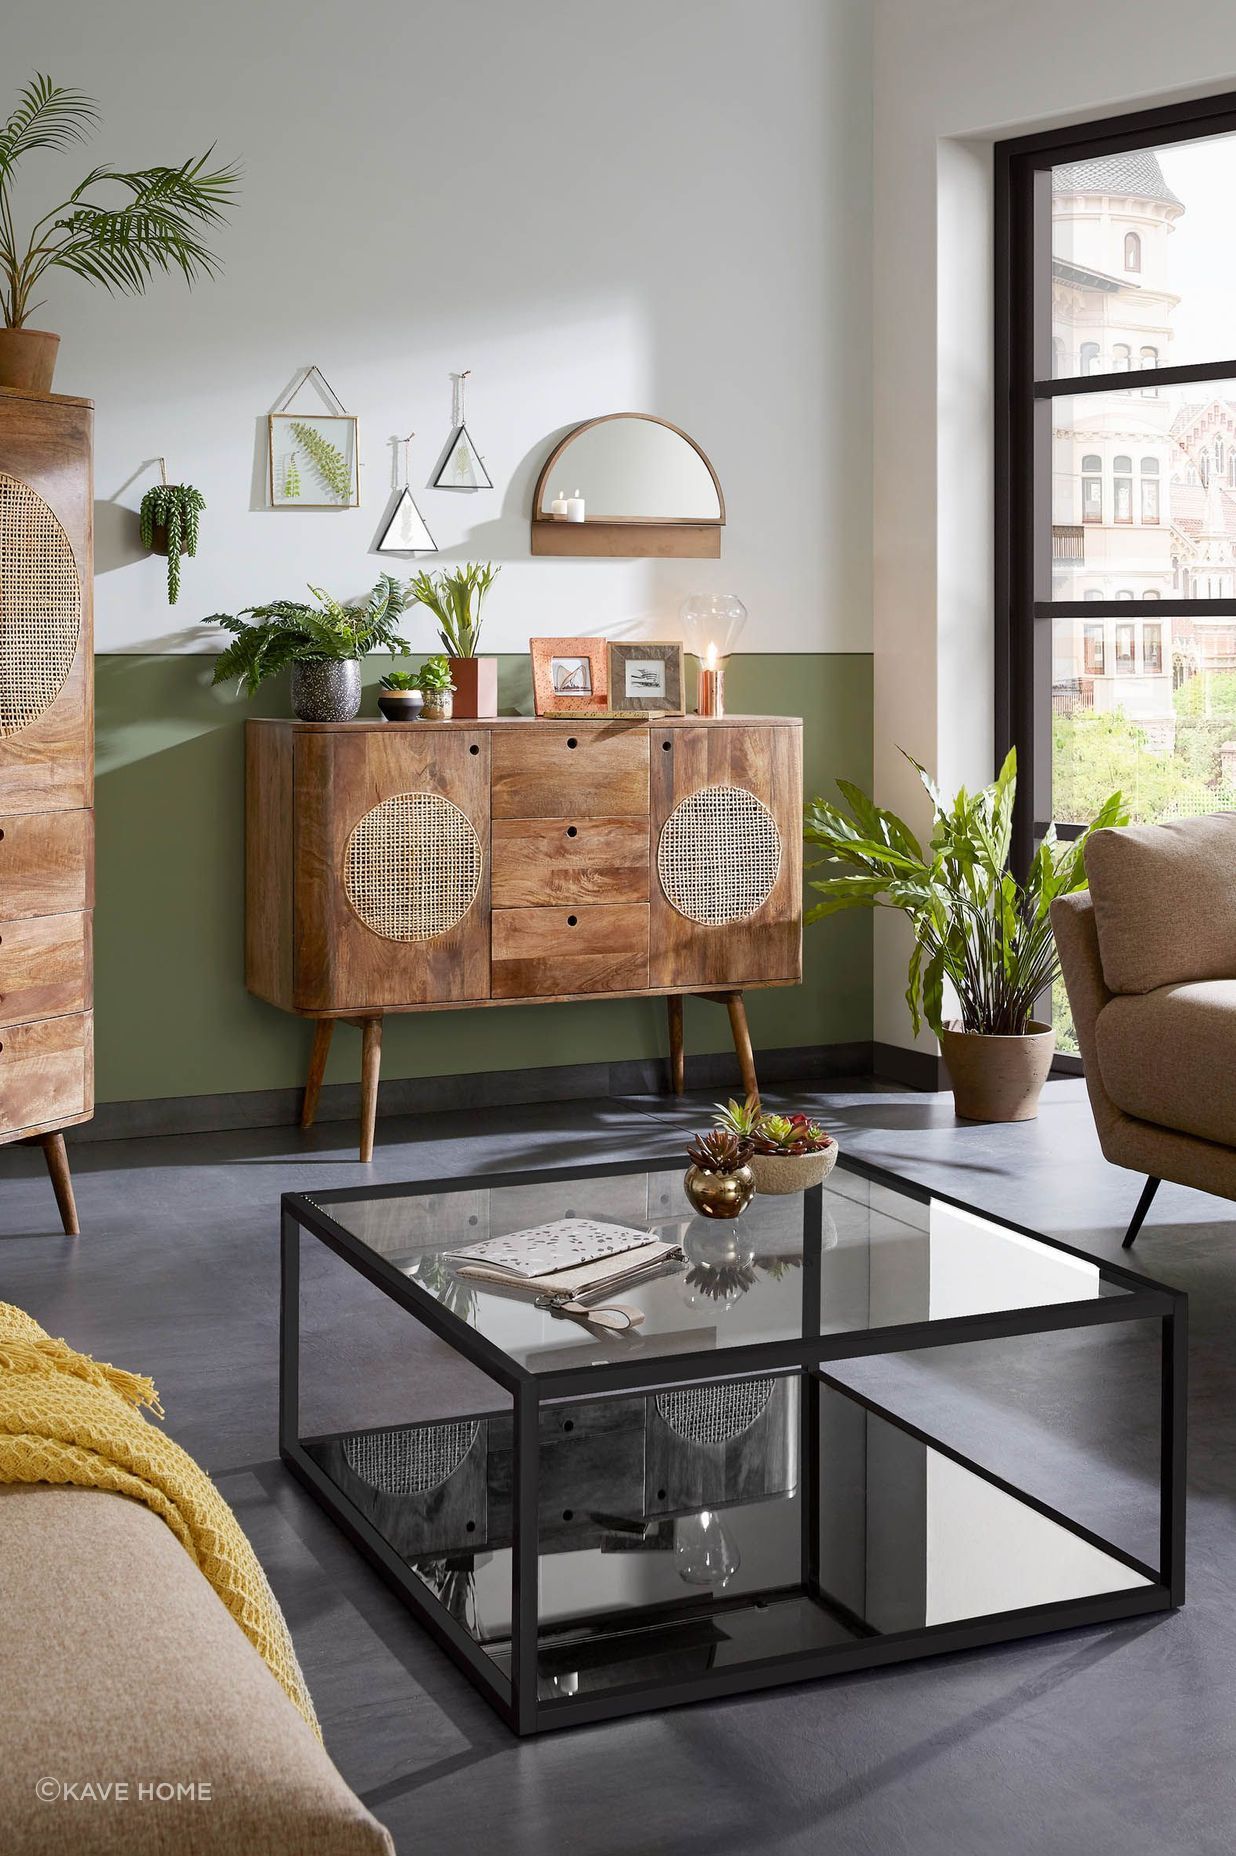 Square coffee tables come in a variety of materials, including hardwood and glass.